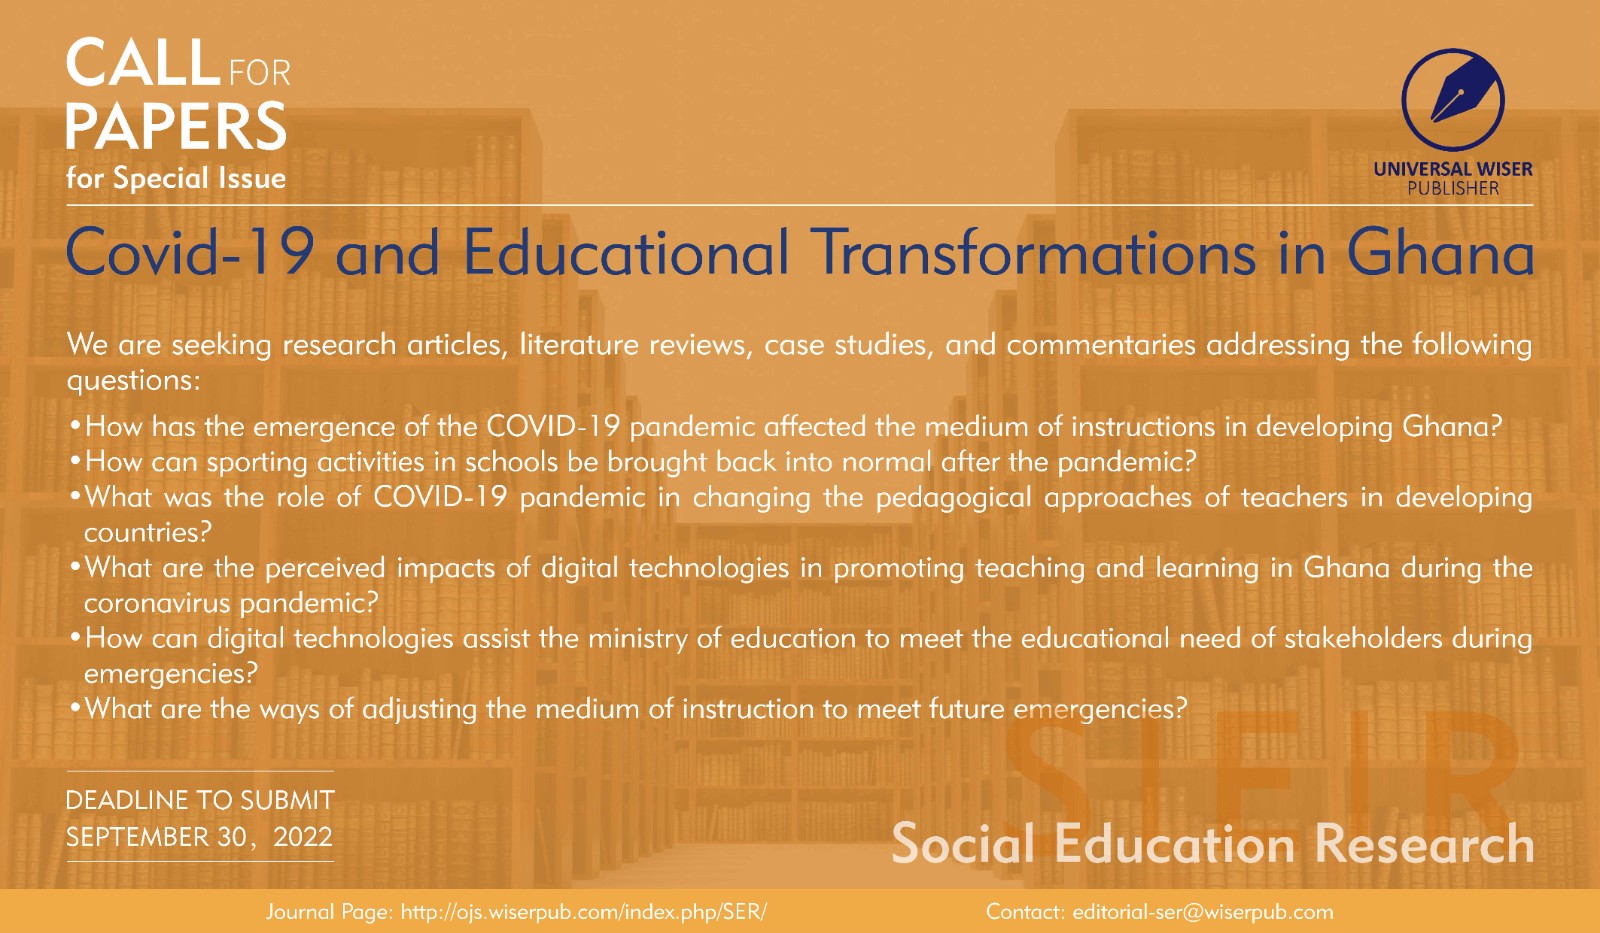 Social Education Research Special Issue on Covid-19 and Educational Transformations in Ghana